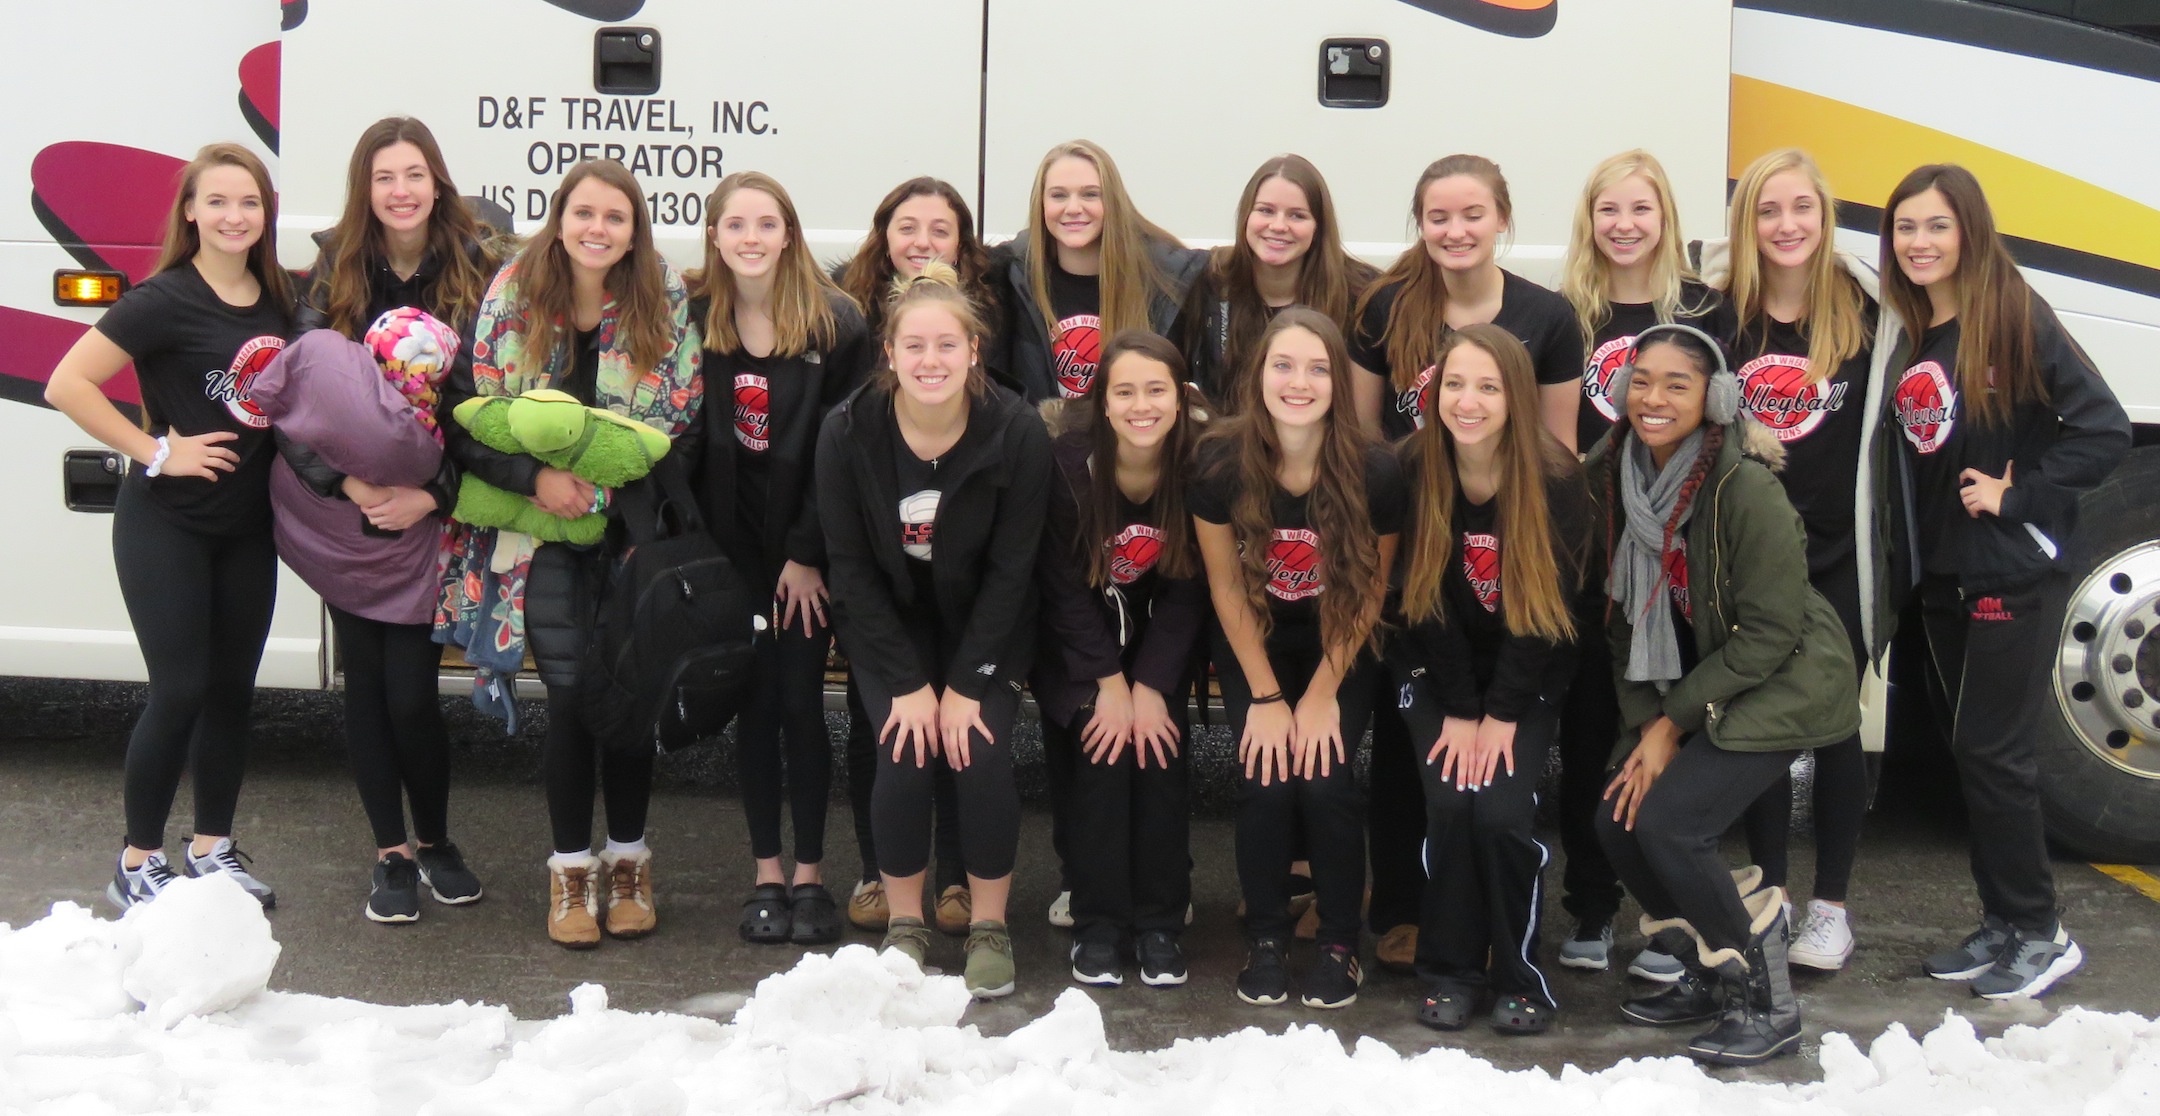 The Niagara-Wheatfield girls volleyball team poses right before getting on the bus to head to the state tournament in Glens Falls. (Photos by David Yarger)